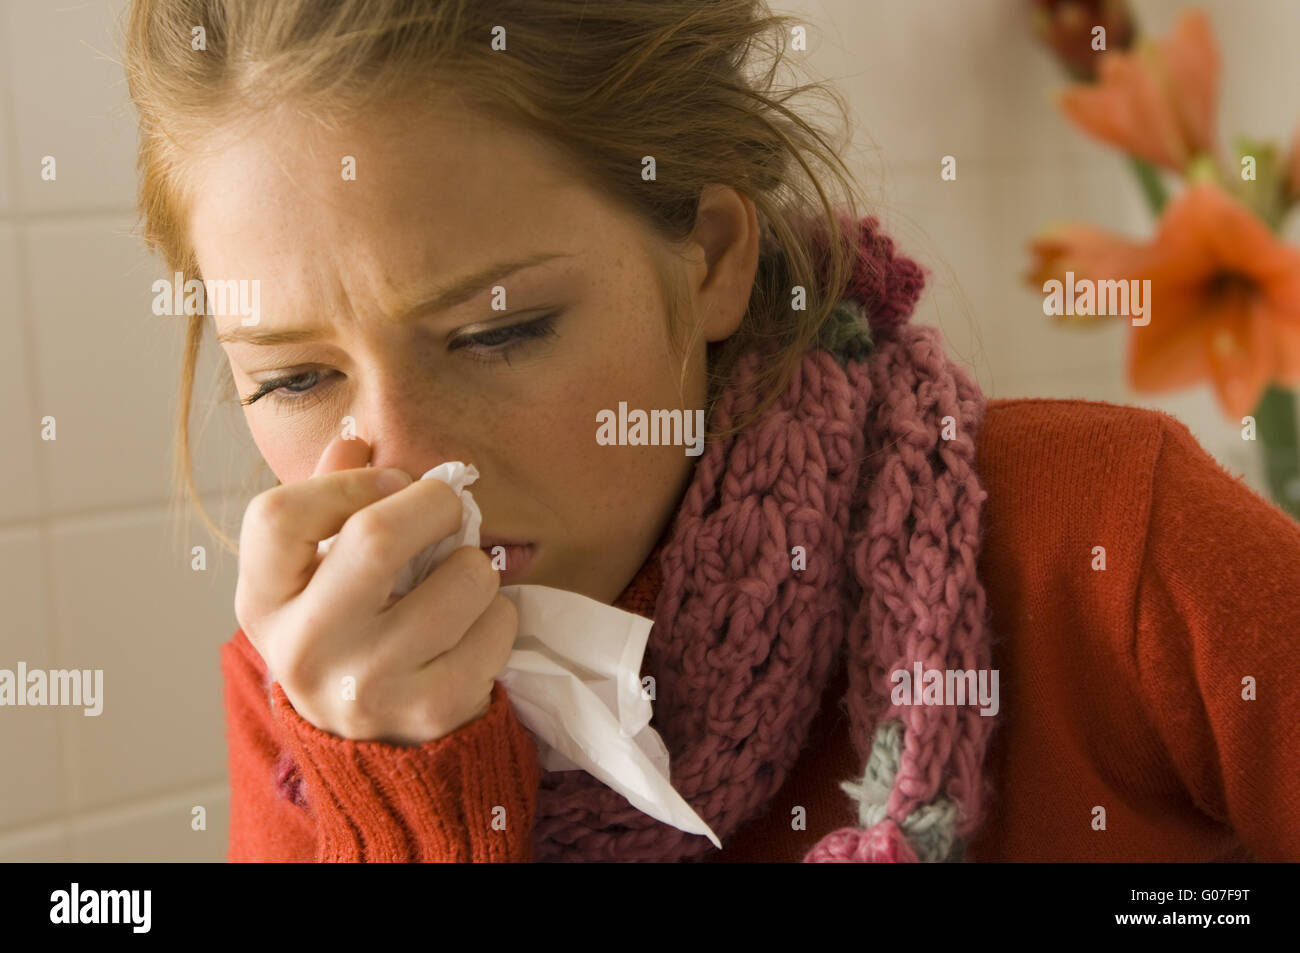 woman having a cold Stock Photo